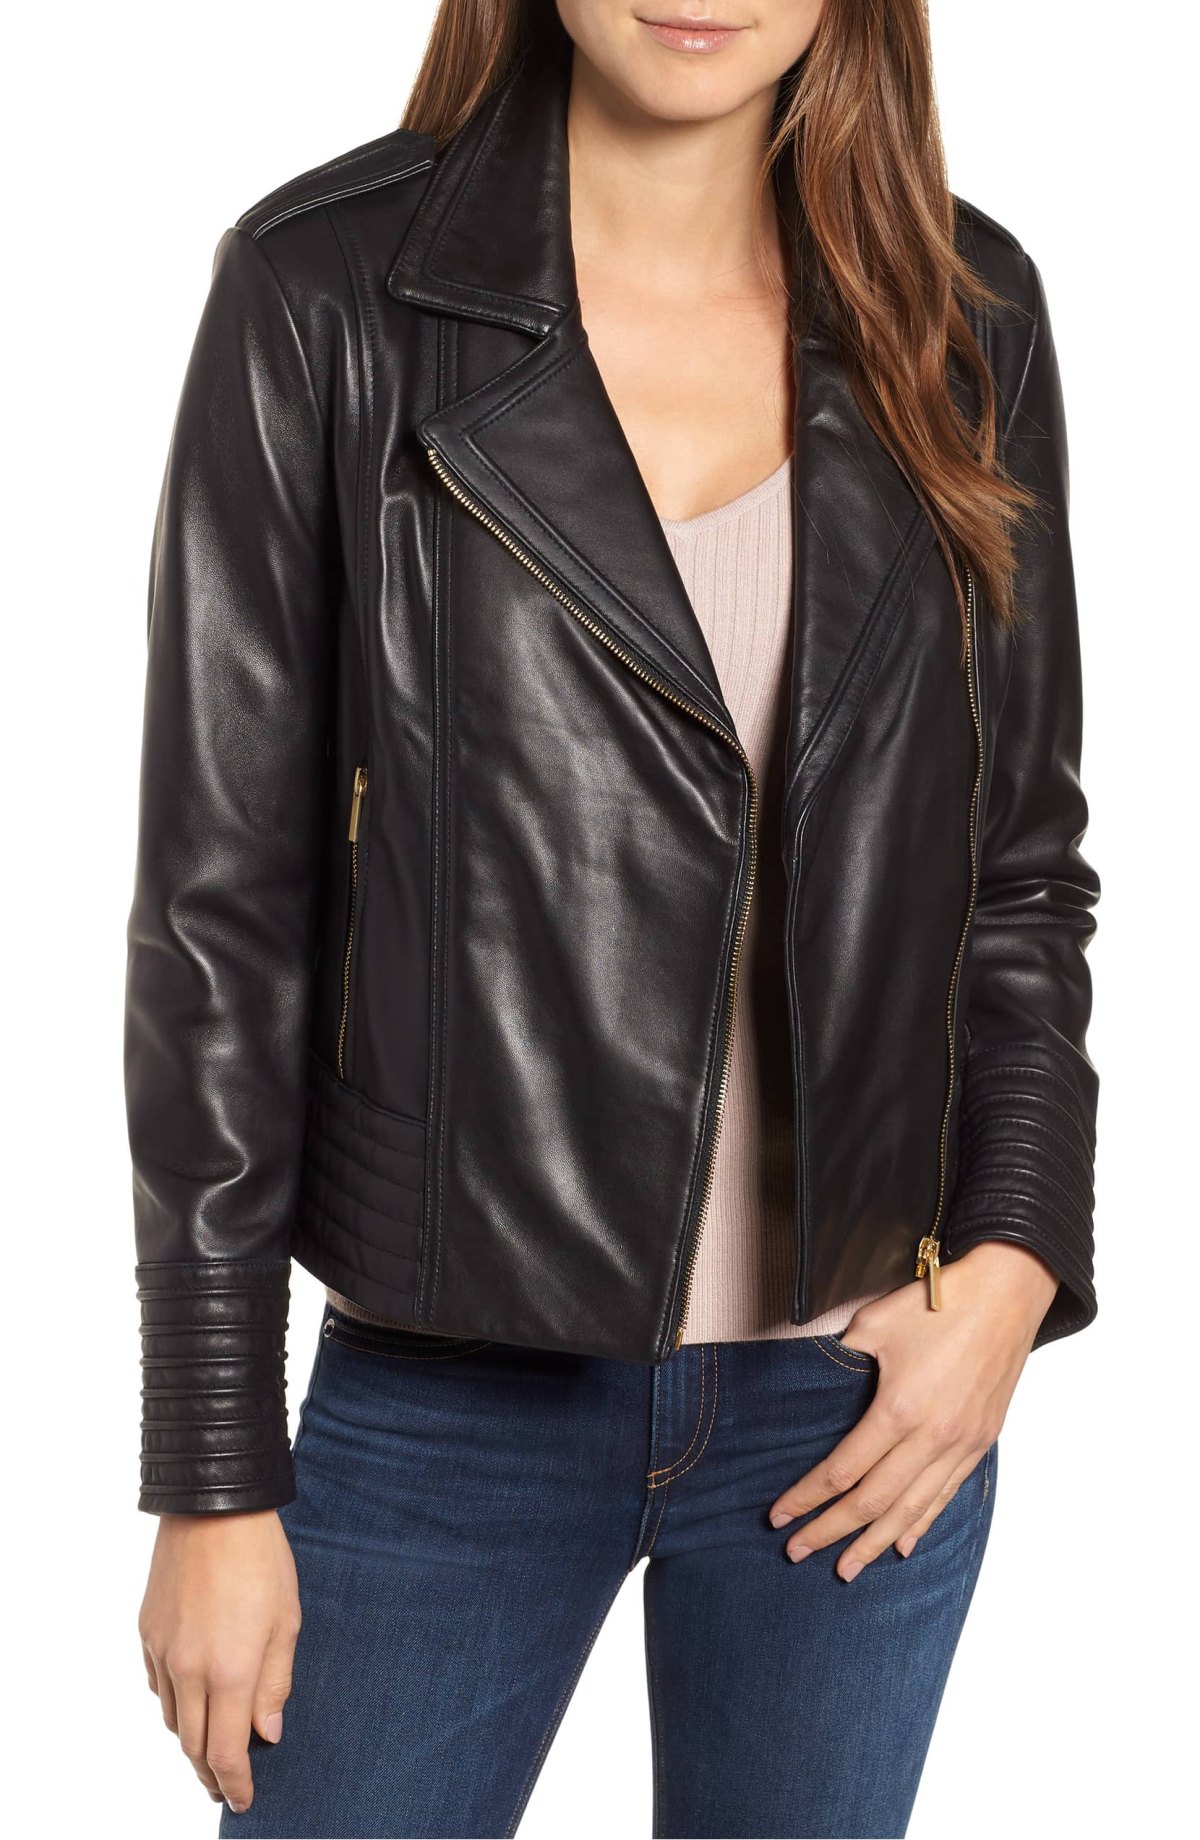 Shop This Badgley Mischka Leather Jacket on Sale at Nordstrom